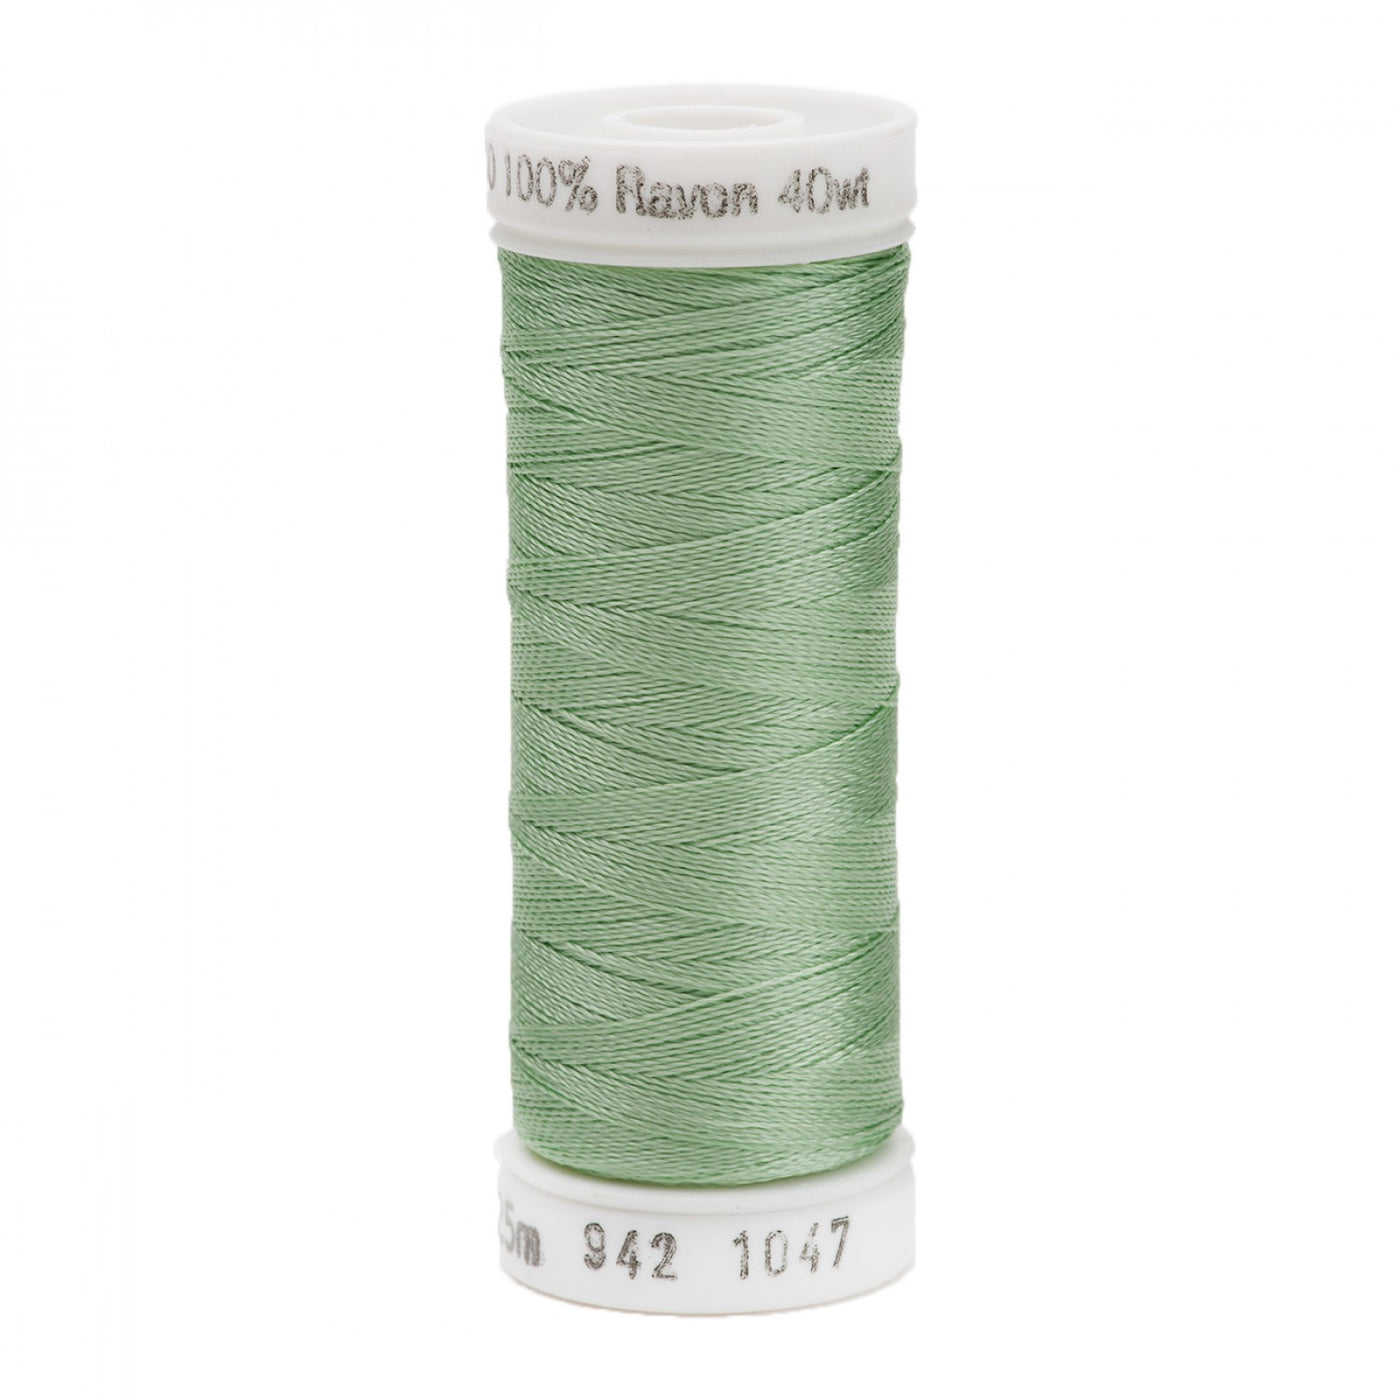 225m 40wt Rayon Embroidery Thread 1047 Mint Green (3884435079213)